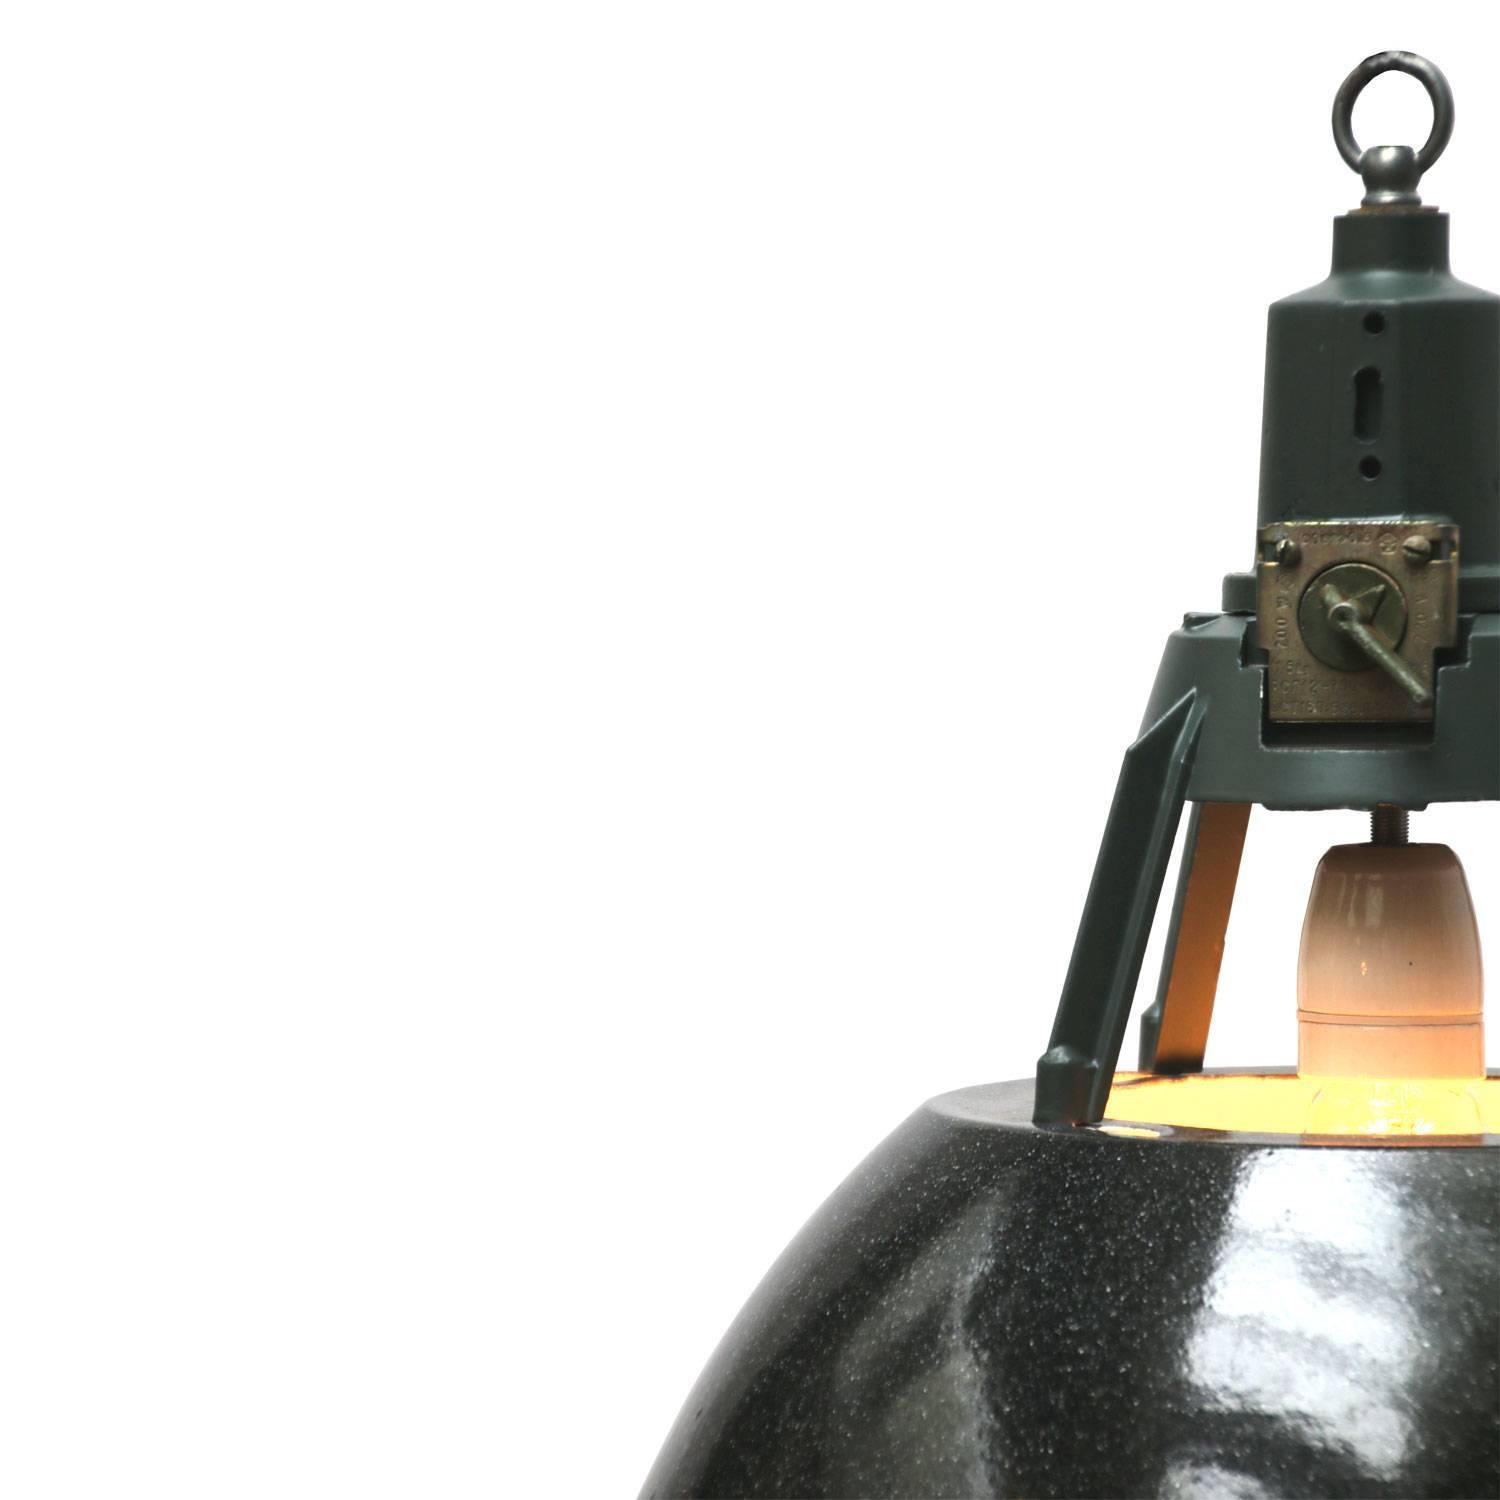 Enamel industrial pendant. Grey enamel shade. White inside.
Dark grey / green cast aluminium top.

Weight: 4.0 kg / 8.8 lb

Priced individual item. All lamps have been made suitable by international standards for incandescent light bulbs,